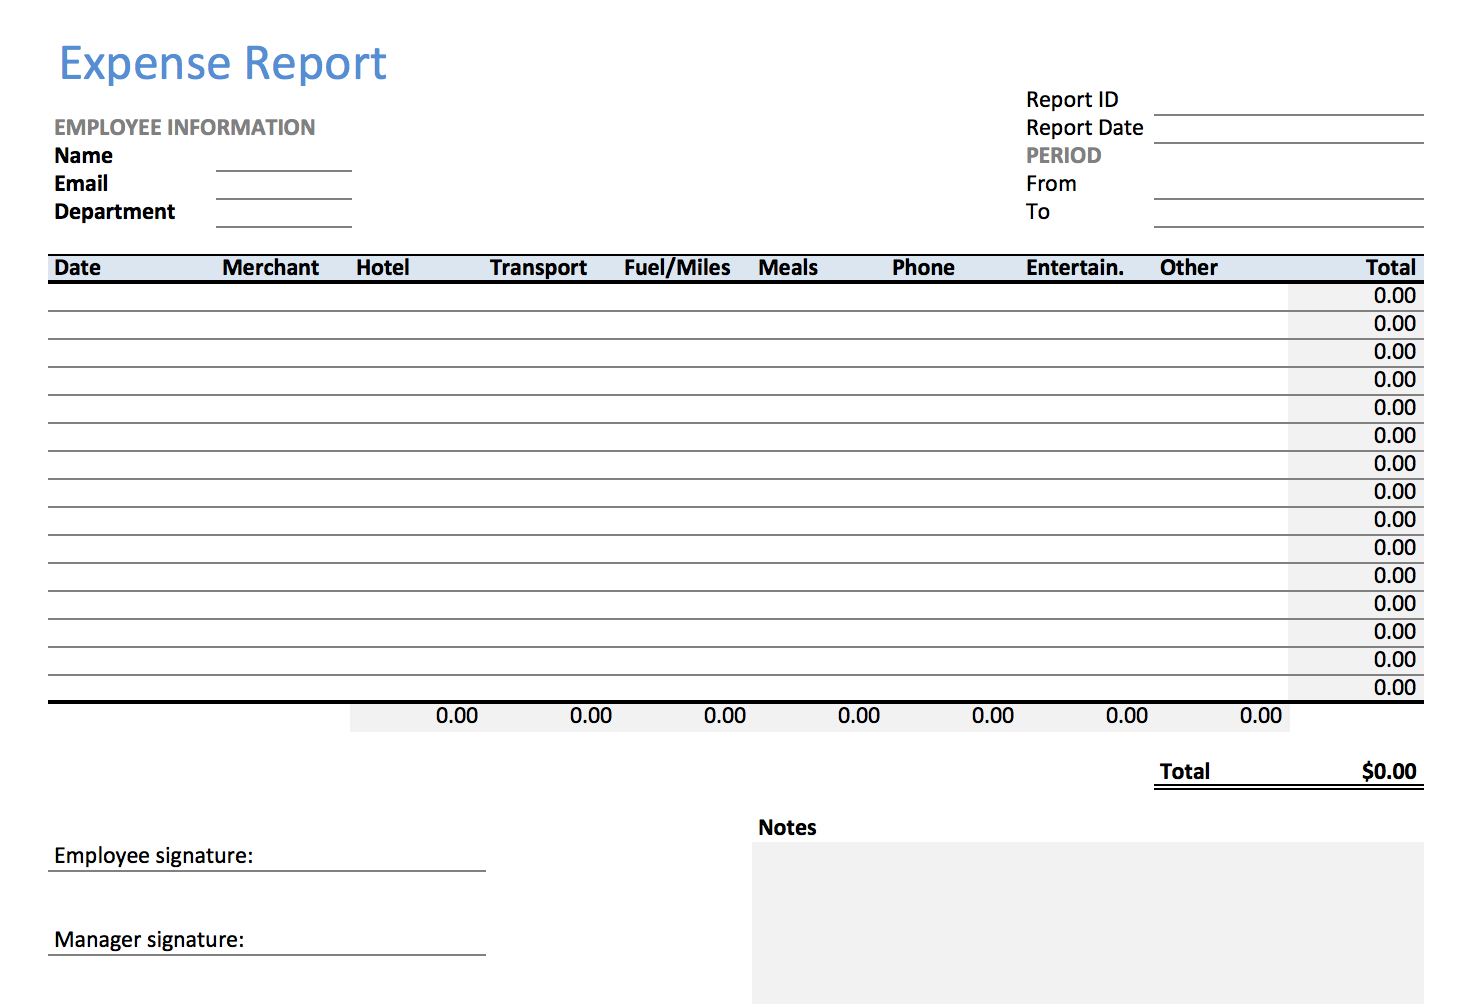 microsoft excel expense report template